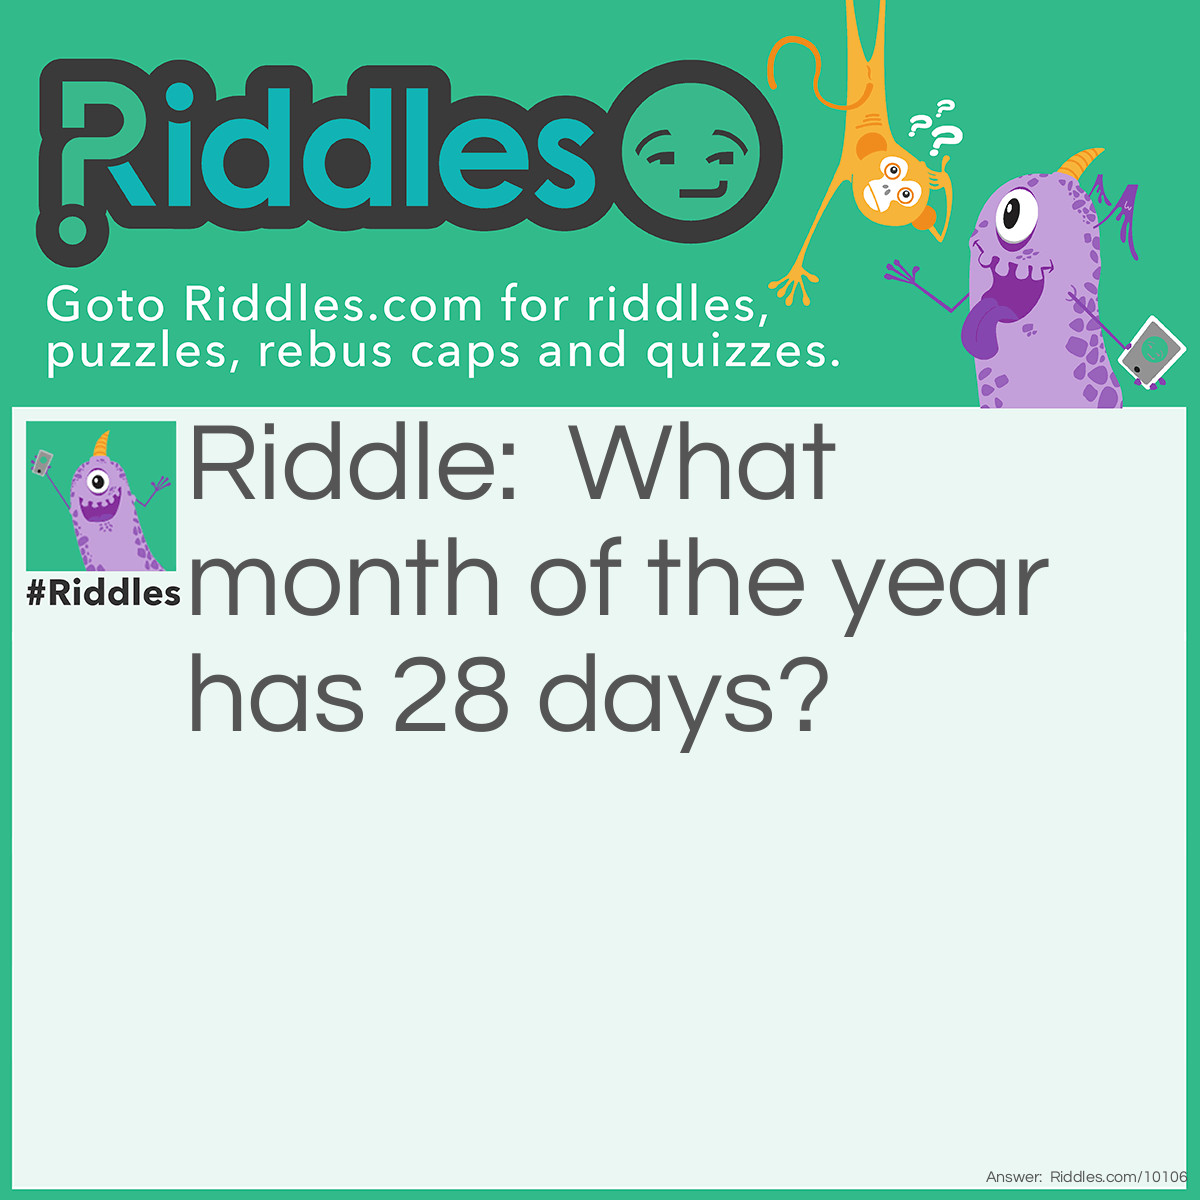 Riddle: What month of the year has 28 days? Answer: All of them.